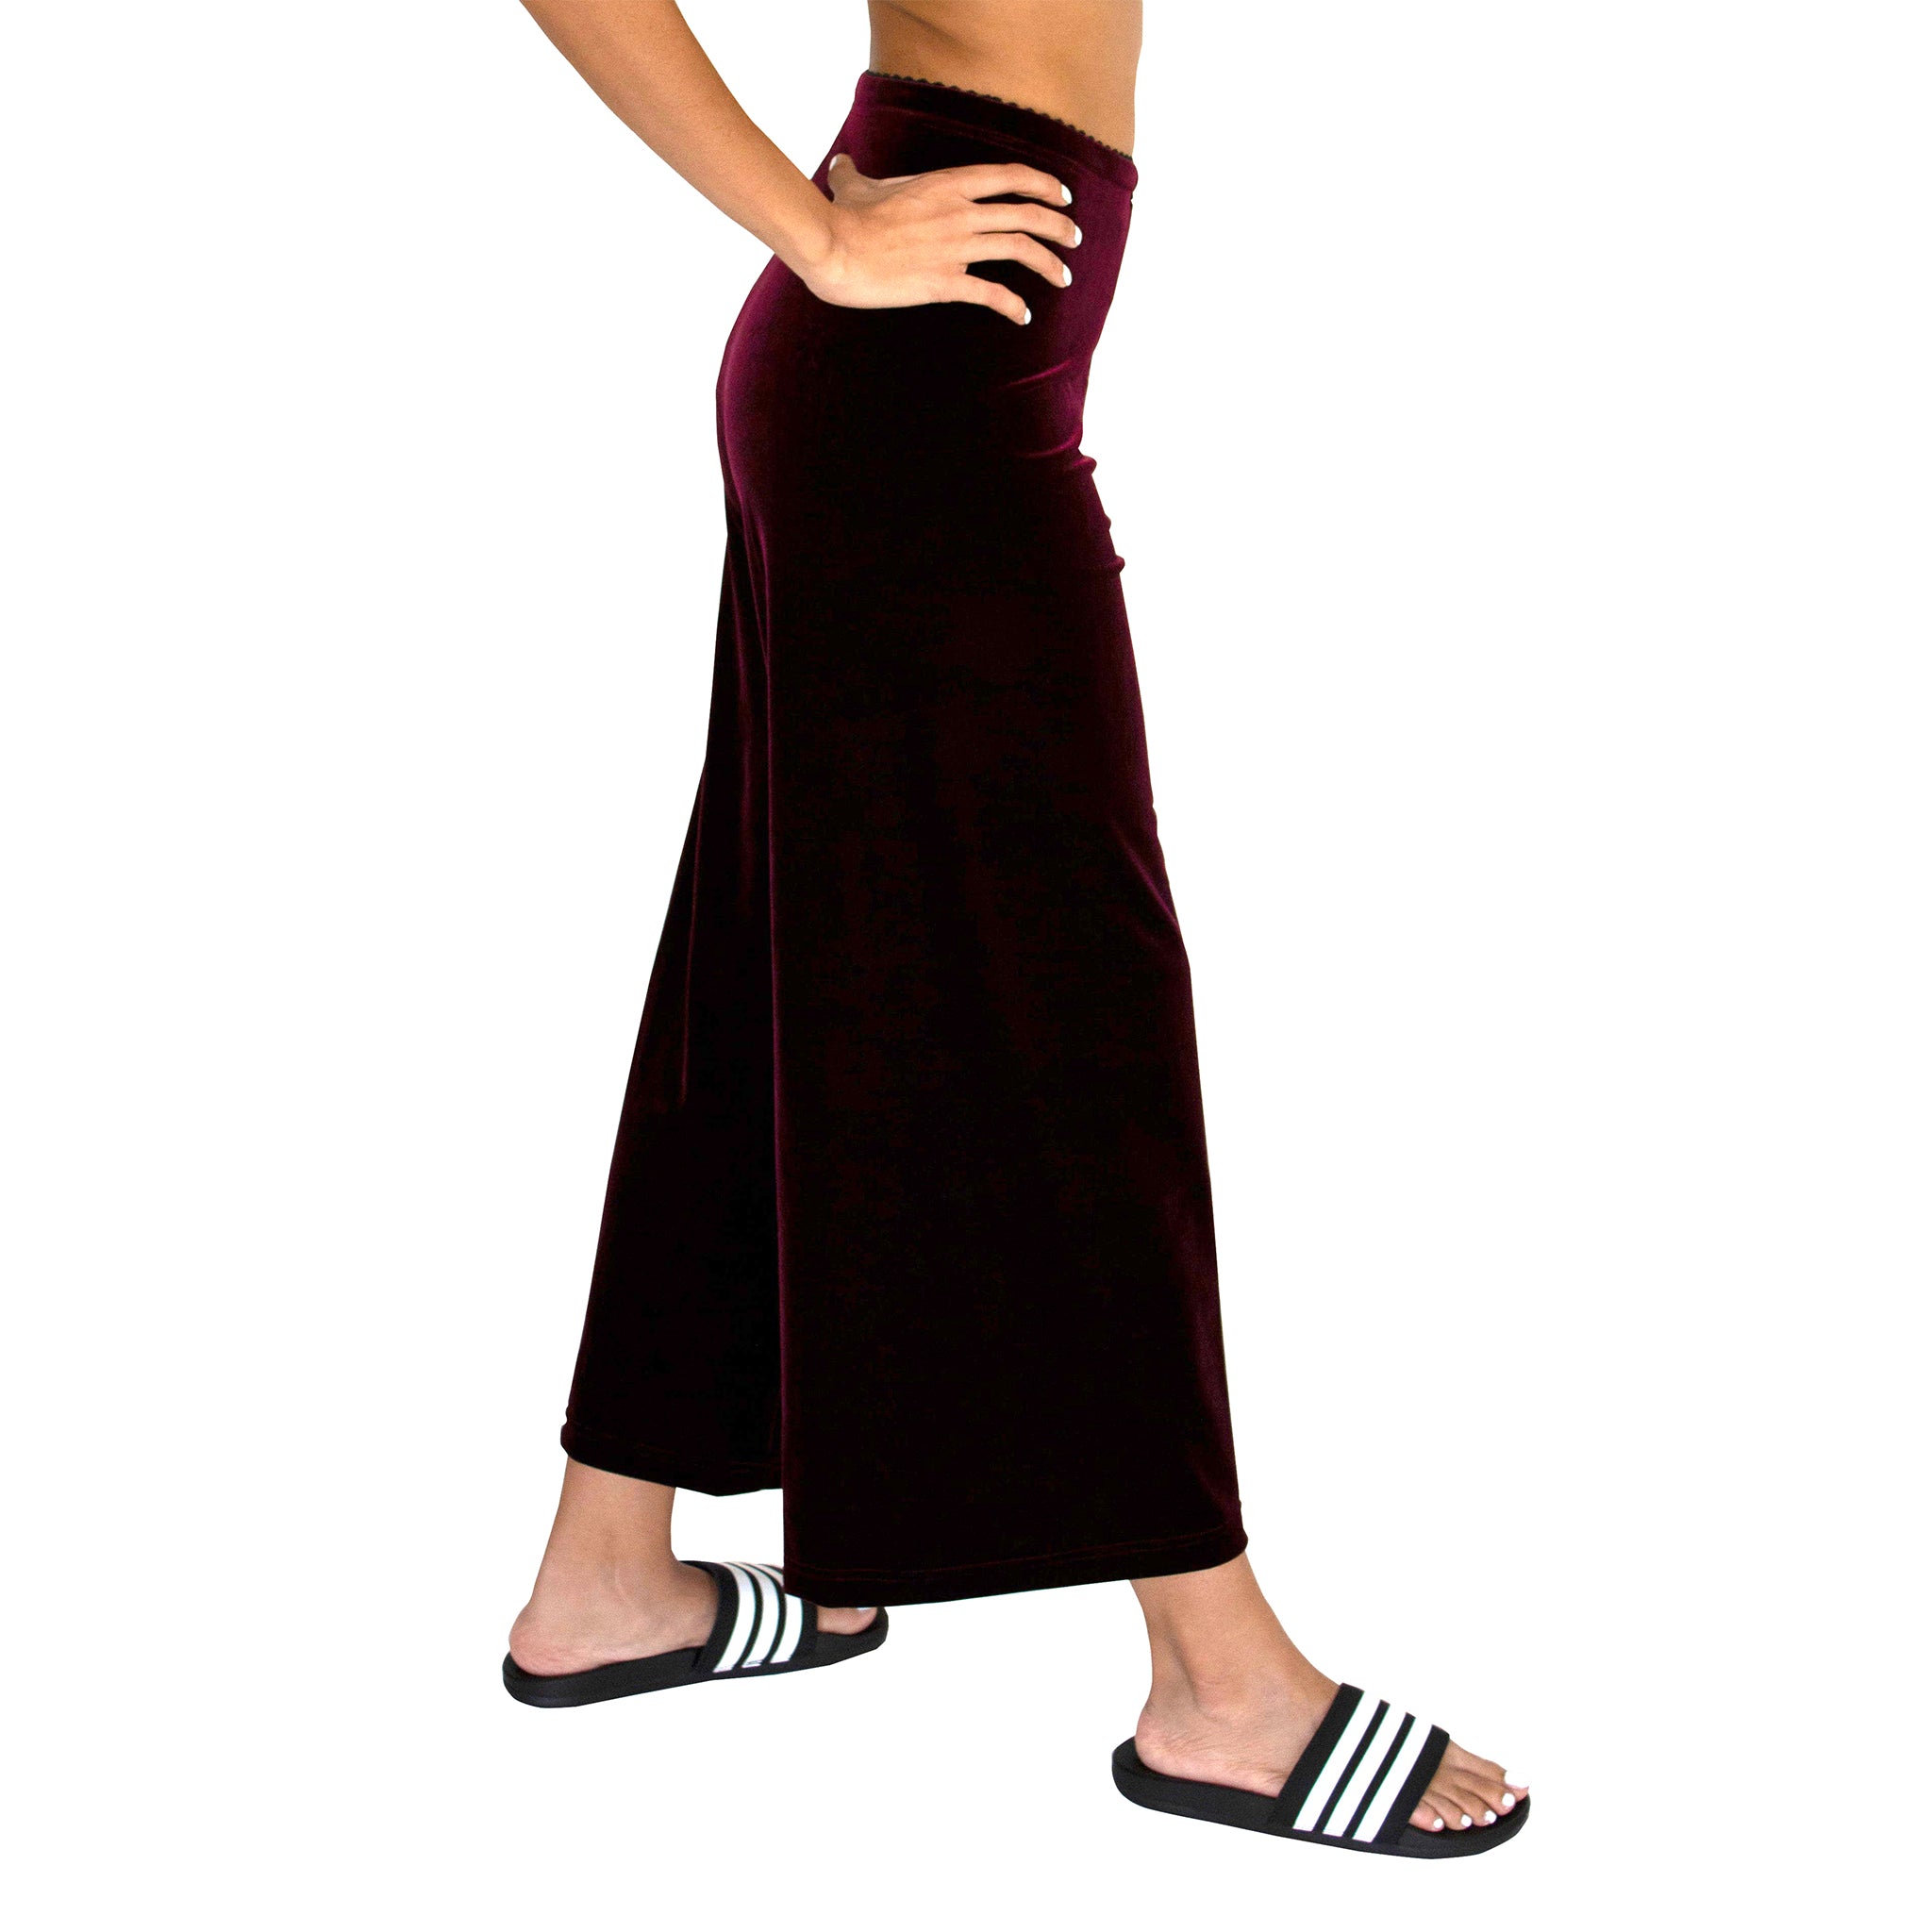 Side view of our Cropped Length Stretch Velvet Pant in Sangria Wine (Burgundy) has elastic waist and 26" inseam.